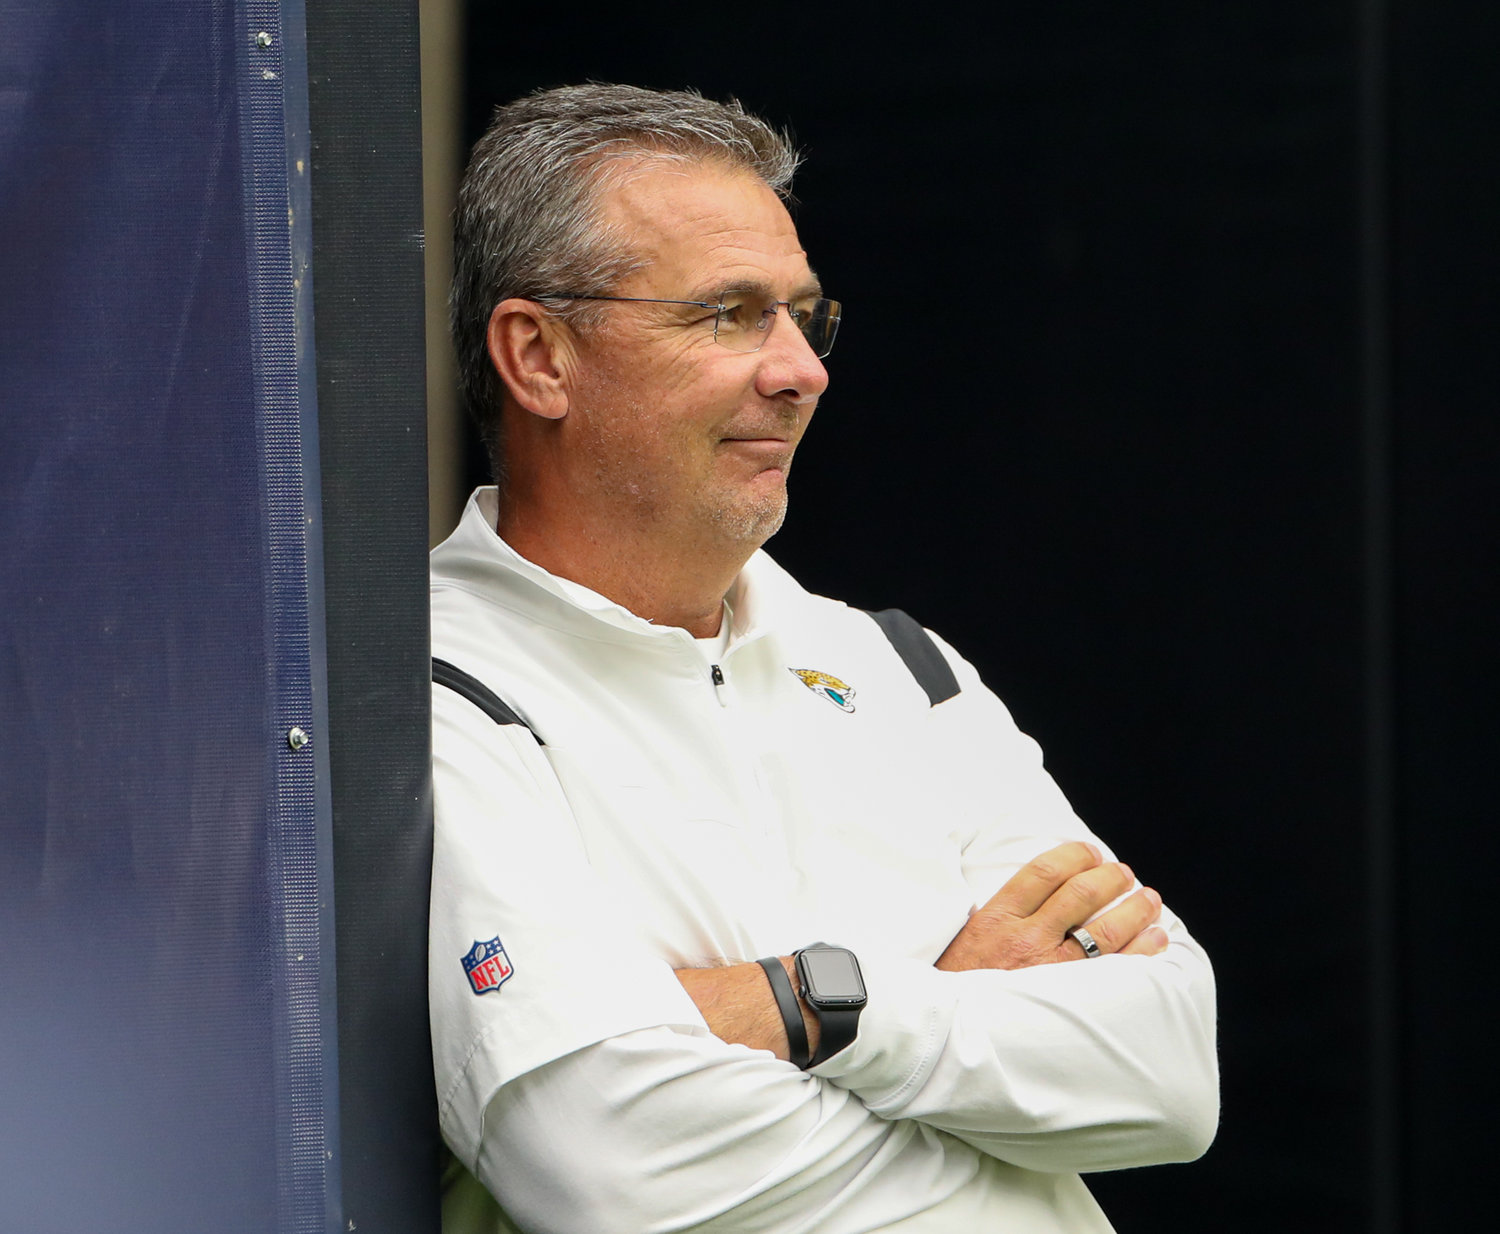 Jacksonville Jaguars head coach Urban Meyer looks out onto the field at NRG Stadium before the start of an NFL game between the Houston Texans and the Jacksonville Jaguars on September 12, 2021 in Houston, Texas.